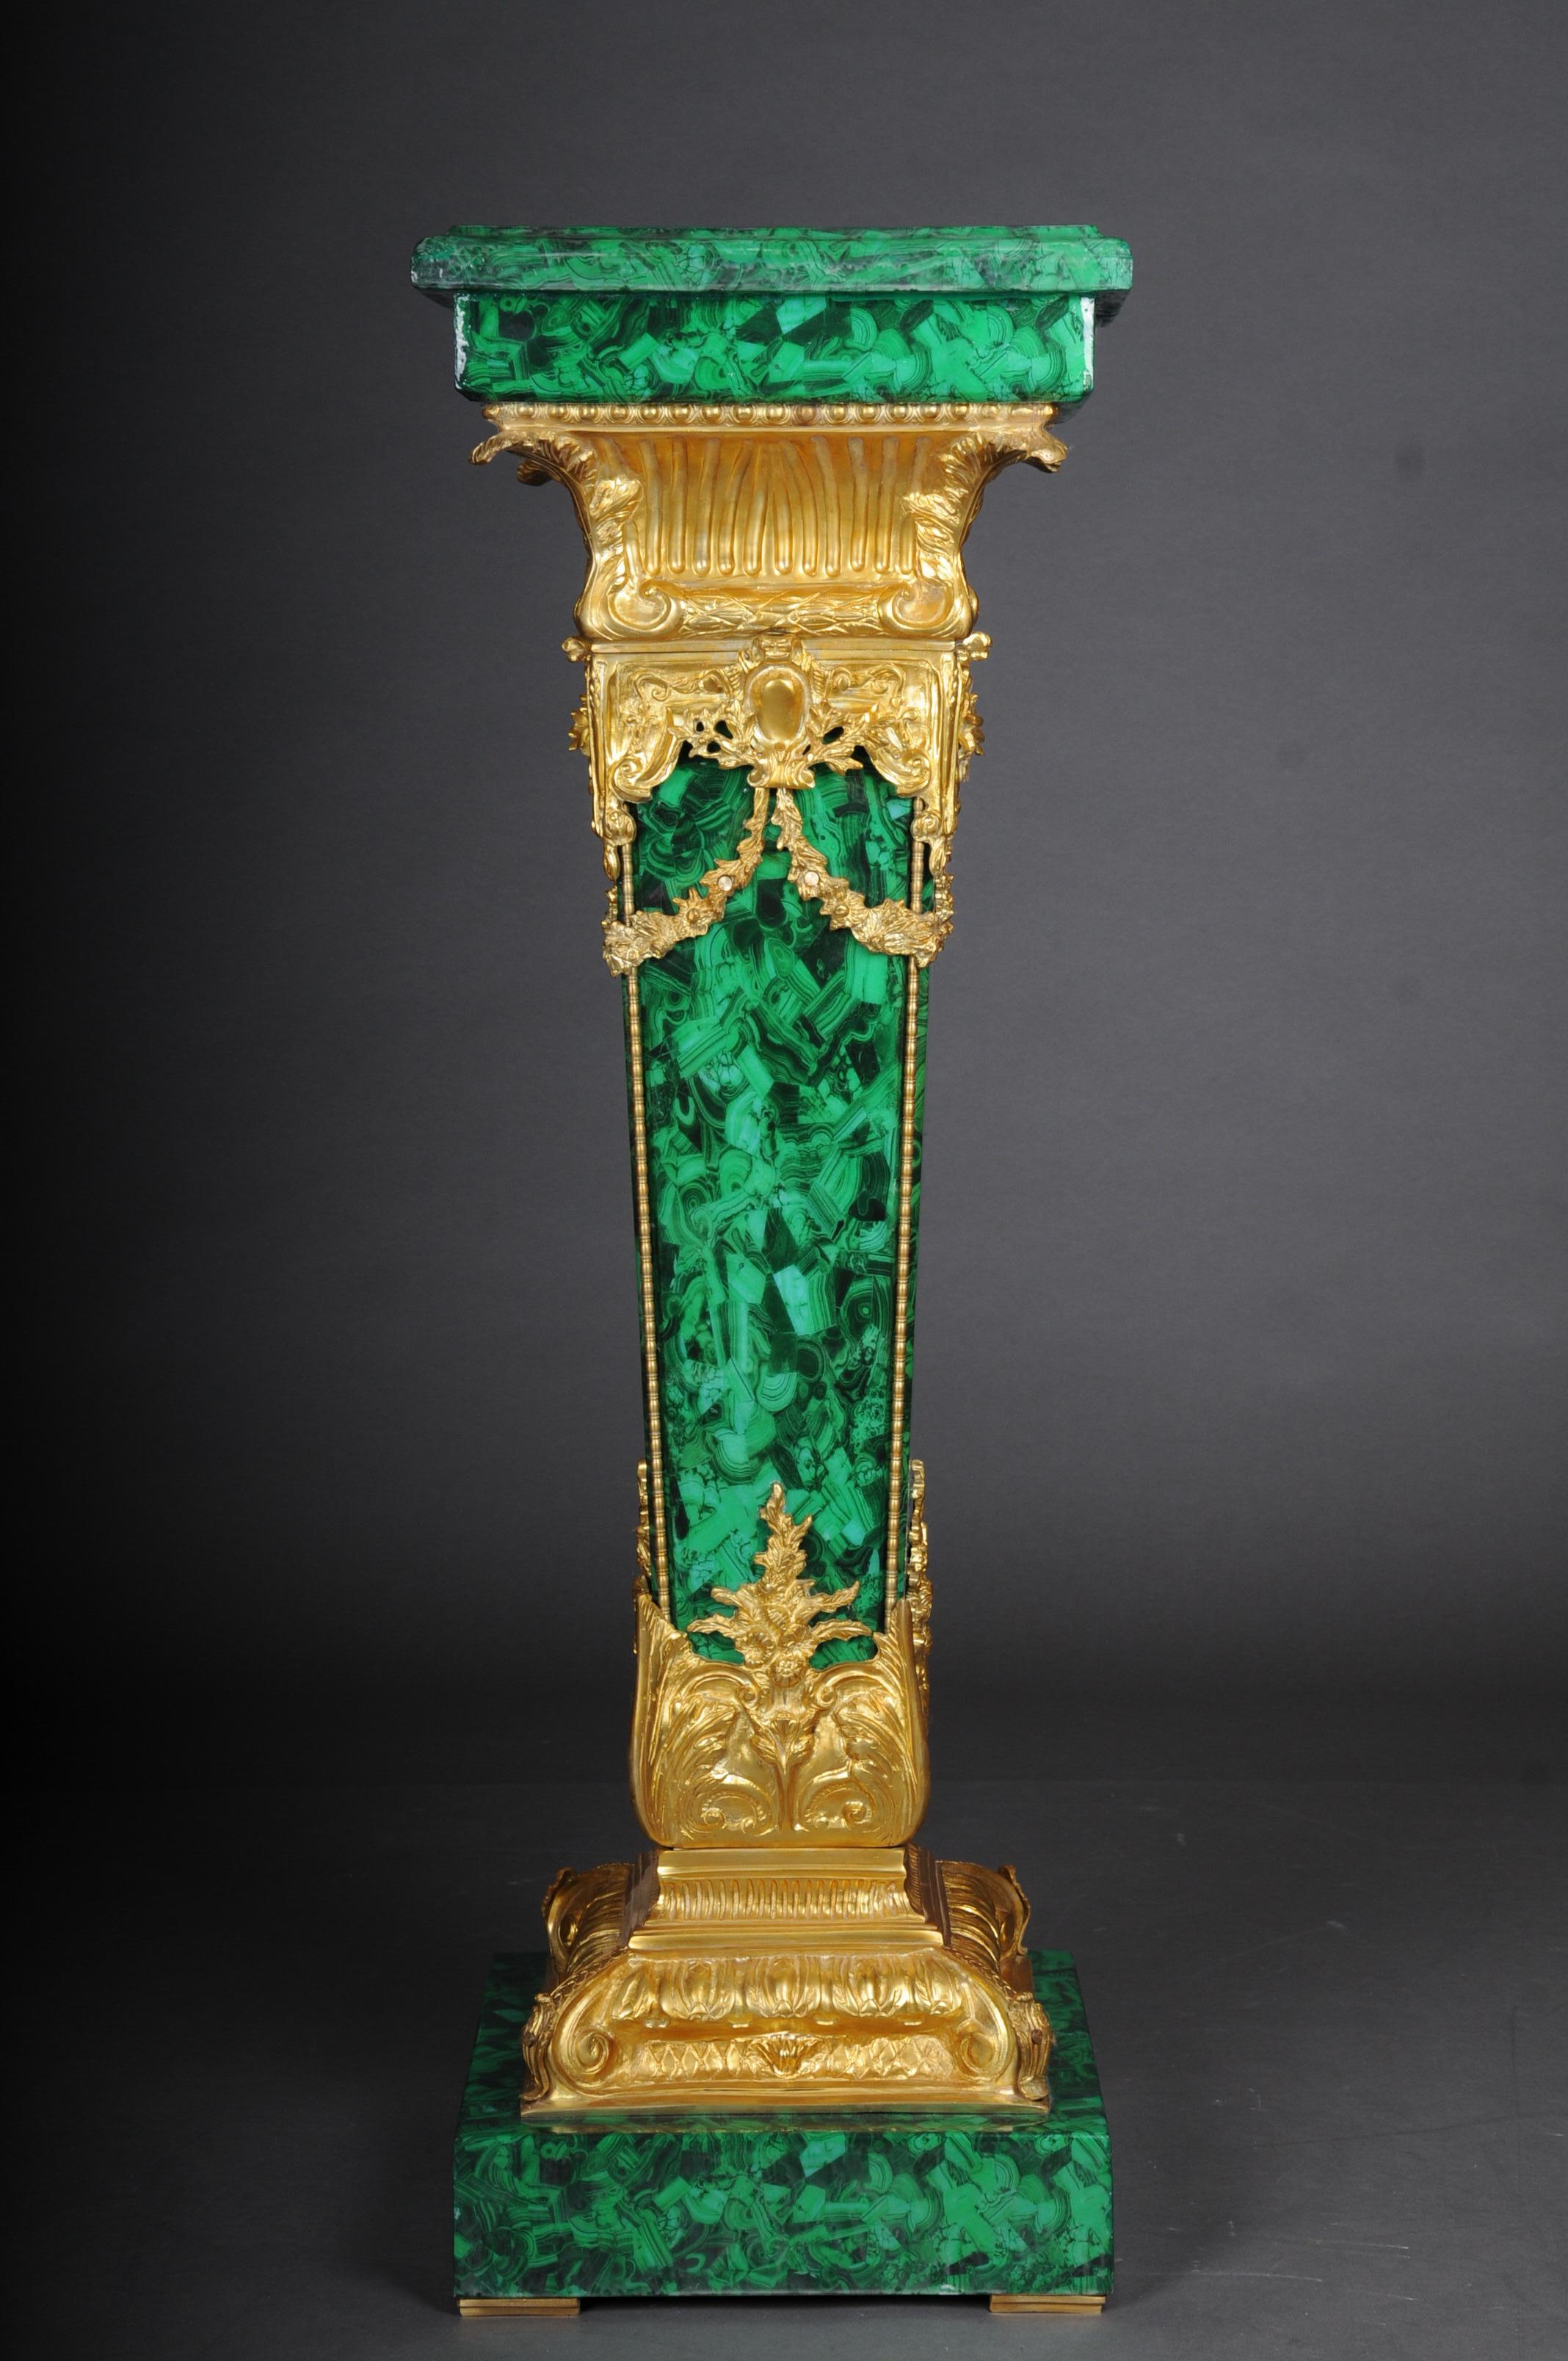 Majestic Marble Column with Malachite Bronze, Napoleon III

Impressive and regal marble column with bronze fittings in Neo-Classicism style. Marble coated with malachite painting technique. Such a pillar is guaranteed to be a real eye-catcher and